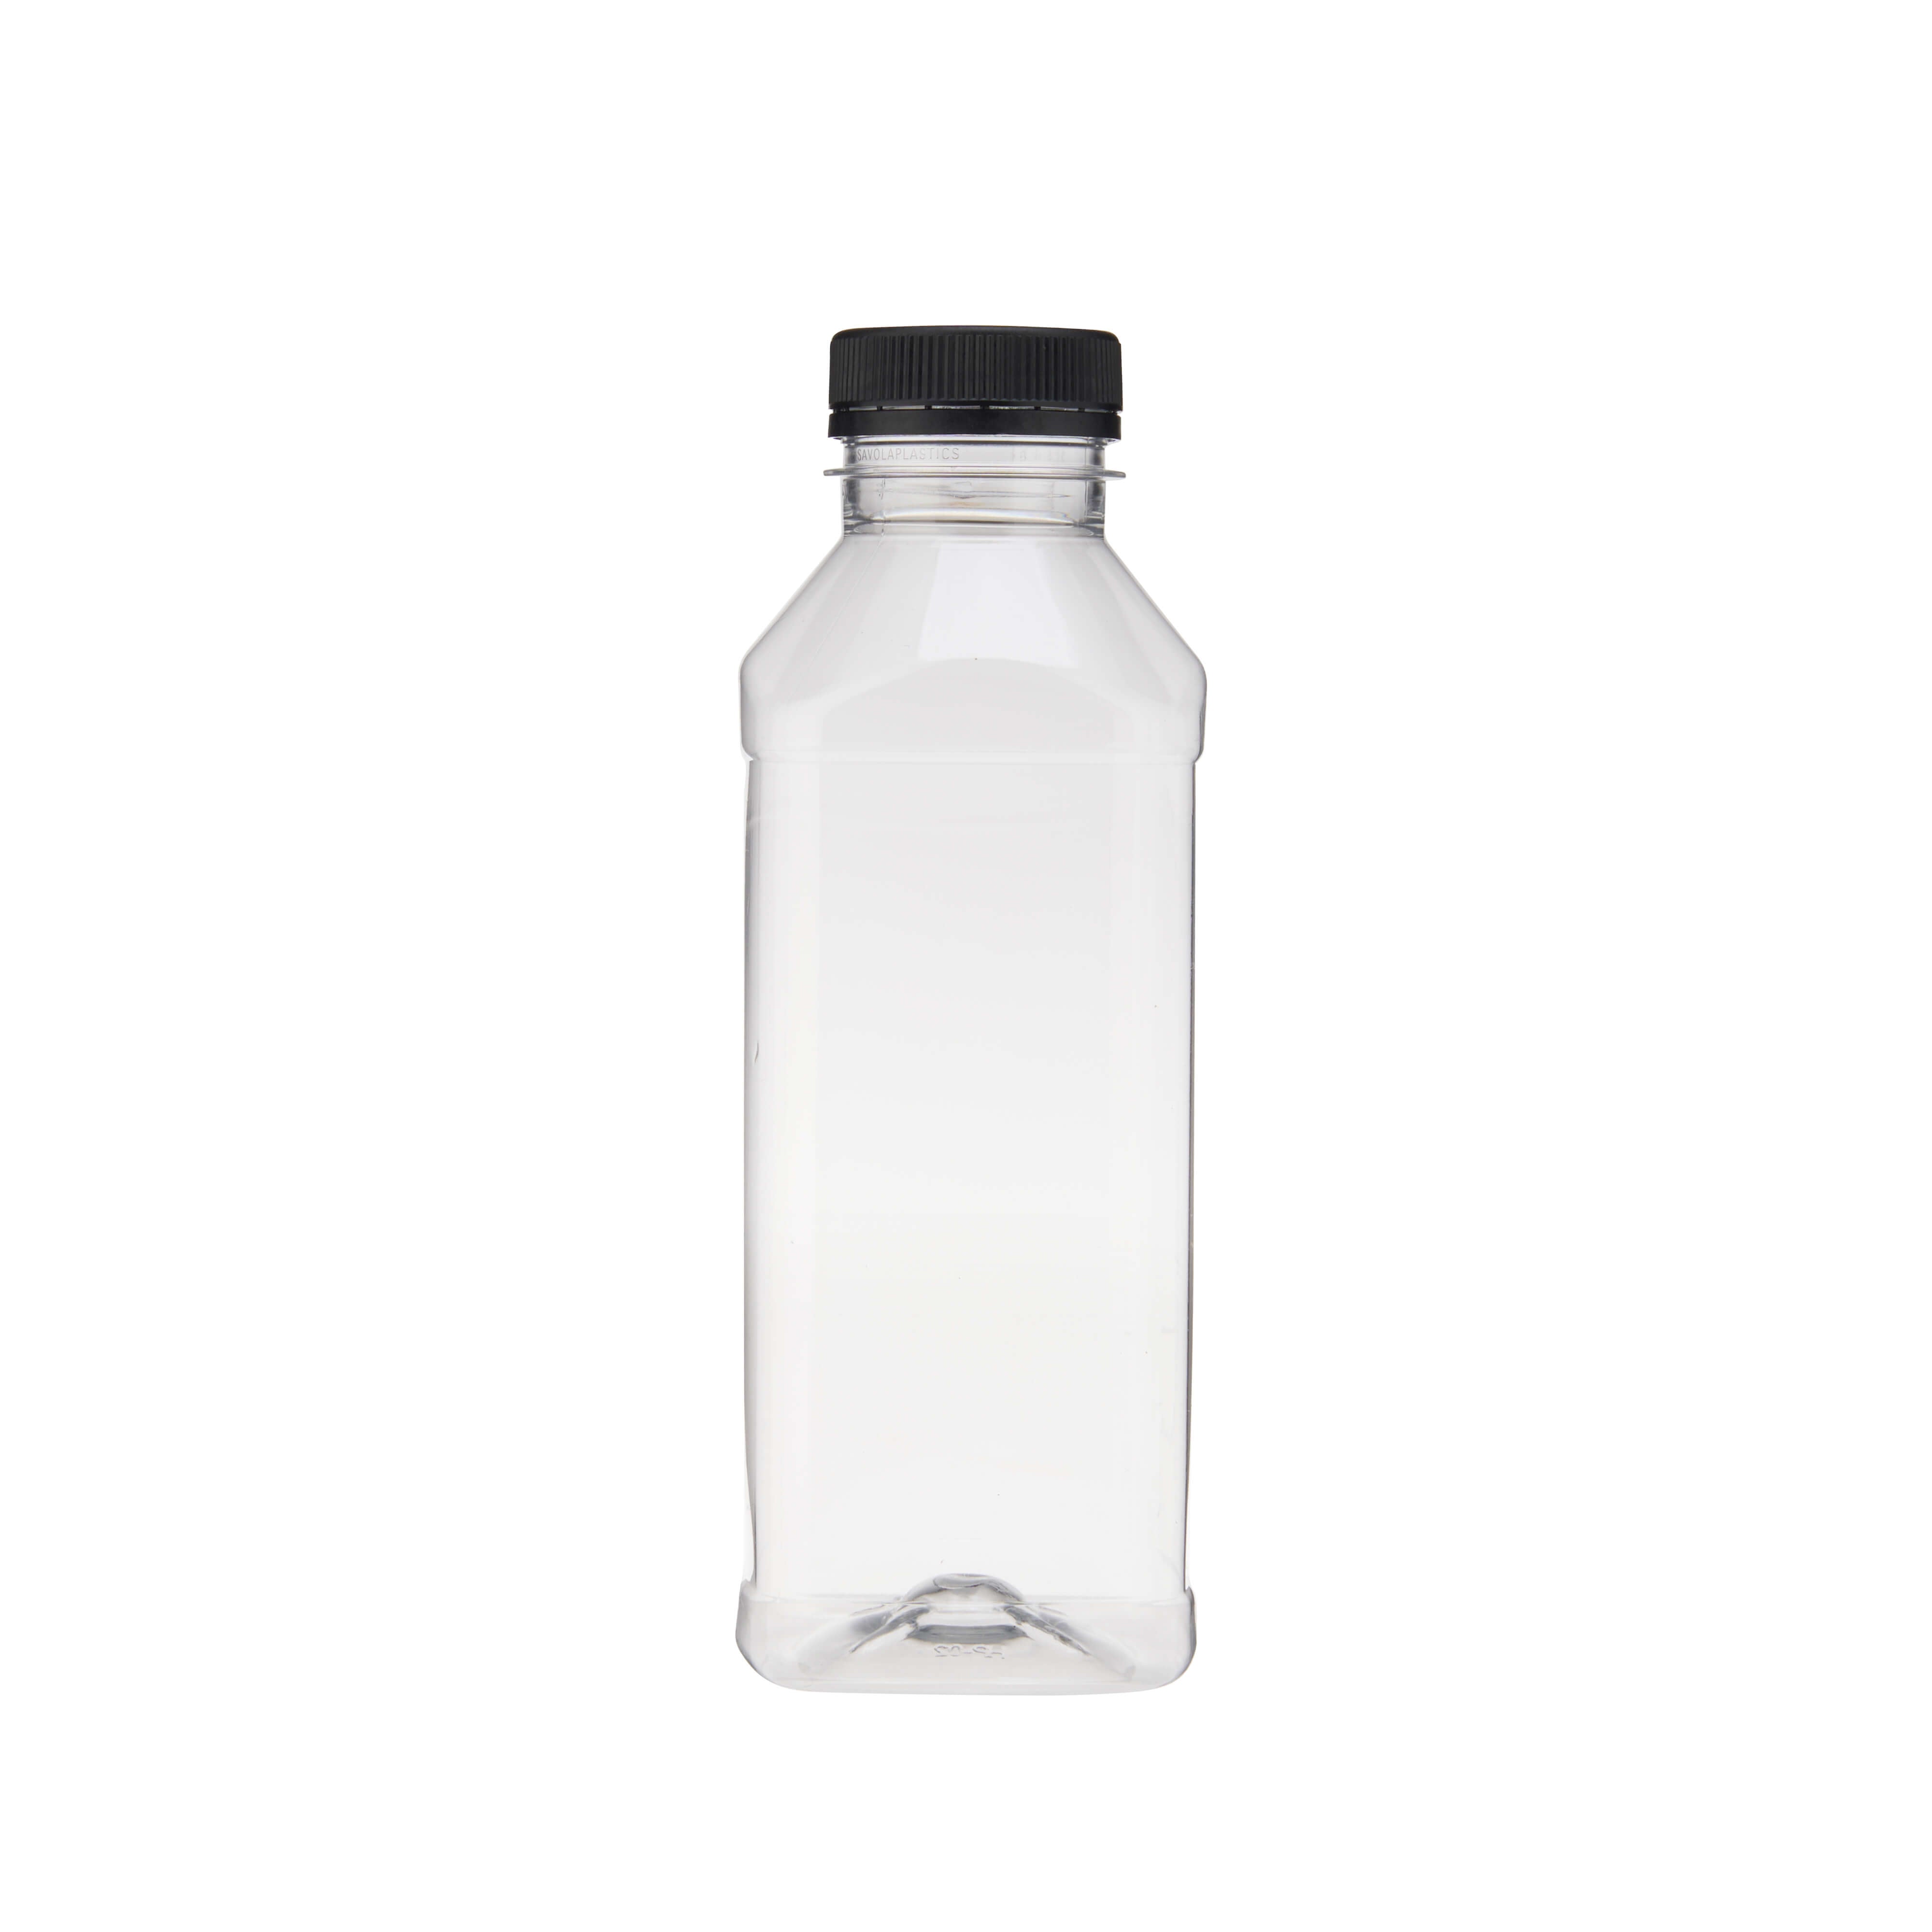 Plastic Square Bottle with Black Cap 500ml - Hotpack Global